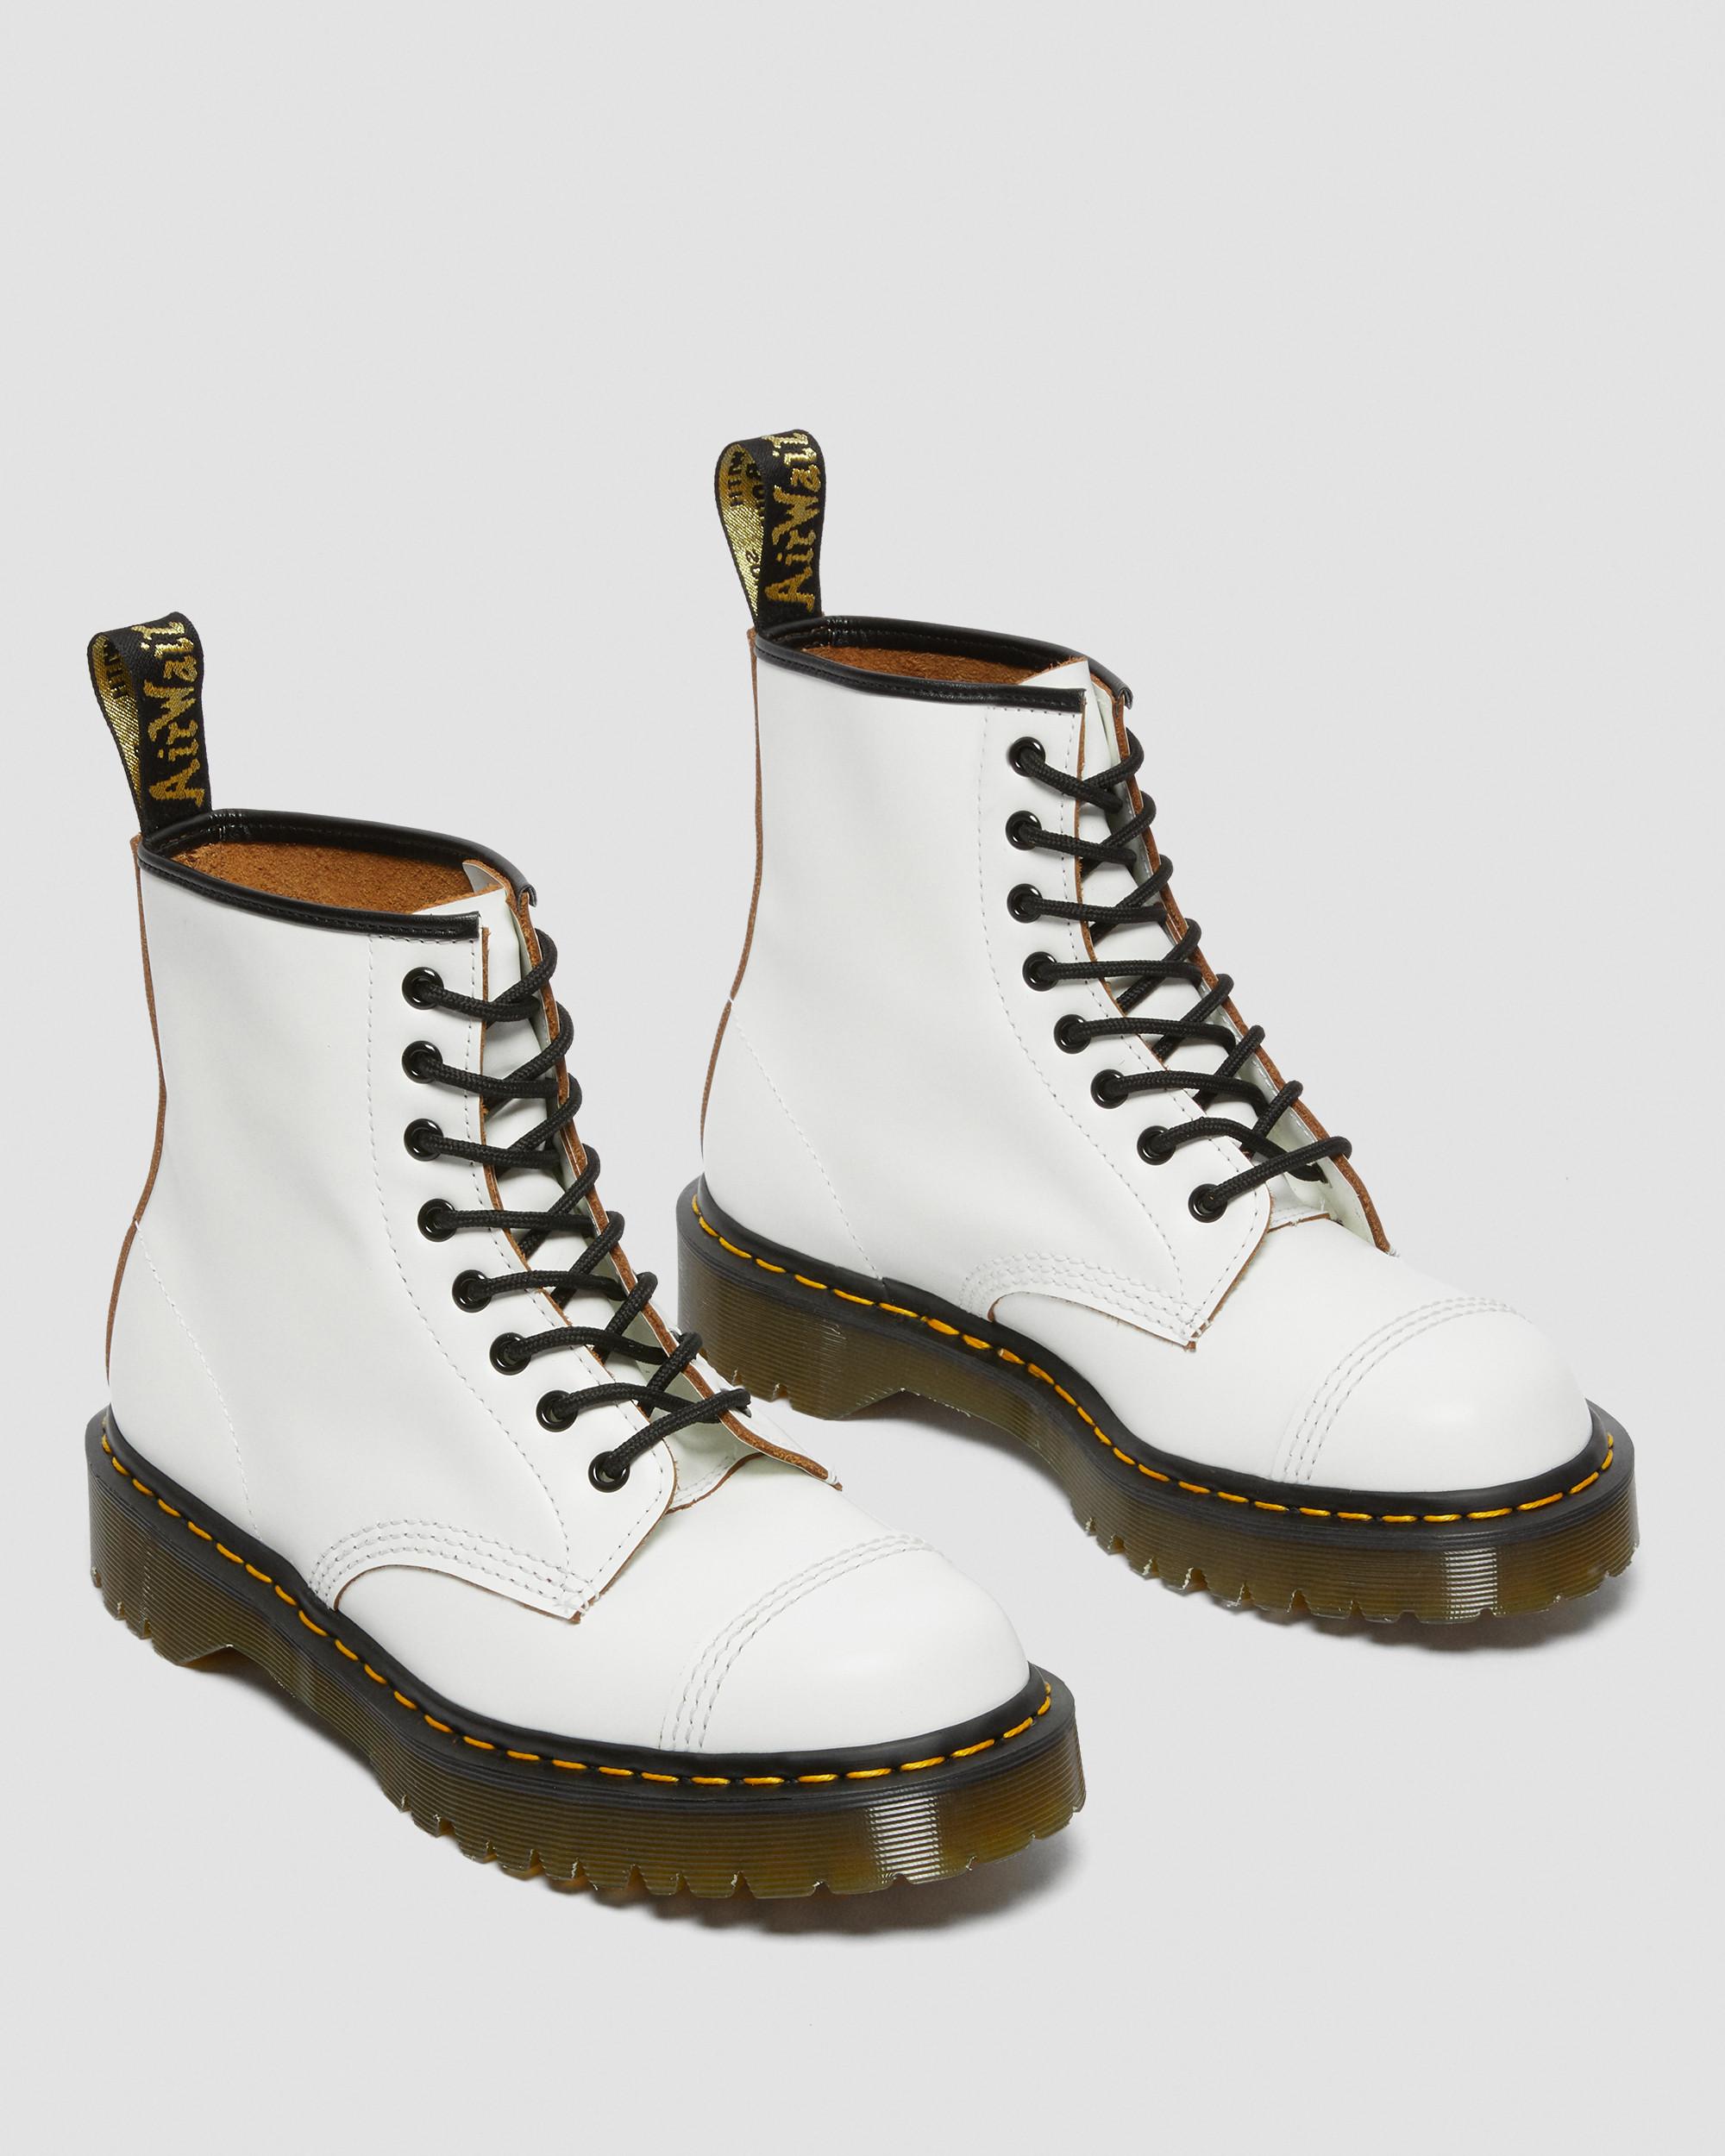 1460 Bex Made in England Toe Cap Leather Lace Up Boots1460 Bex Toe Cap Boots Dr. Martens